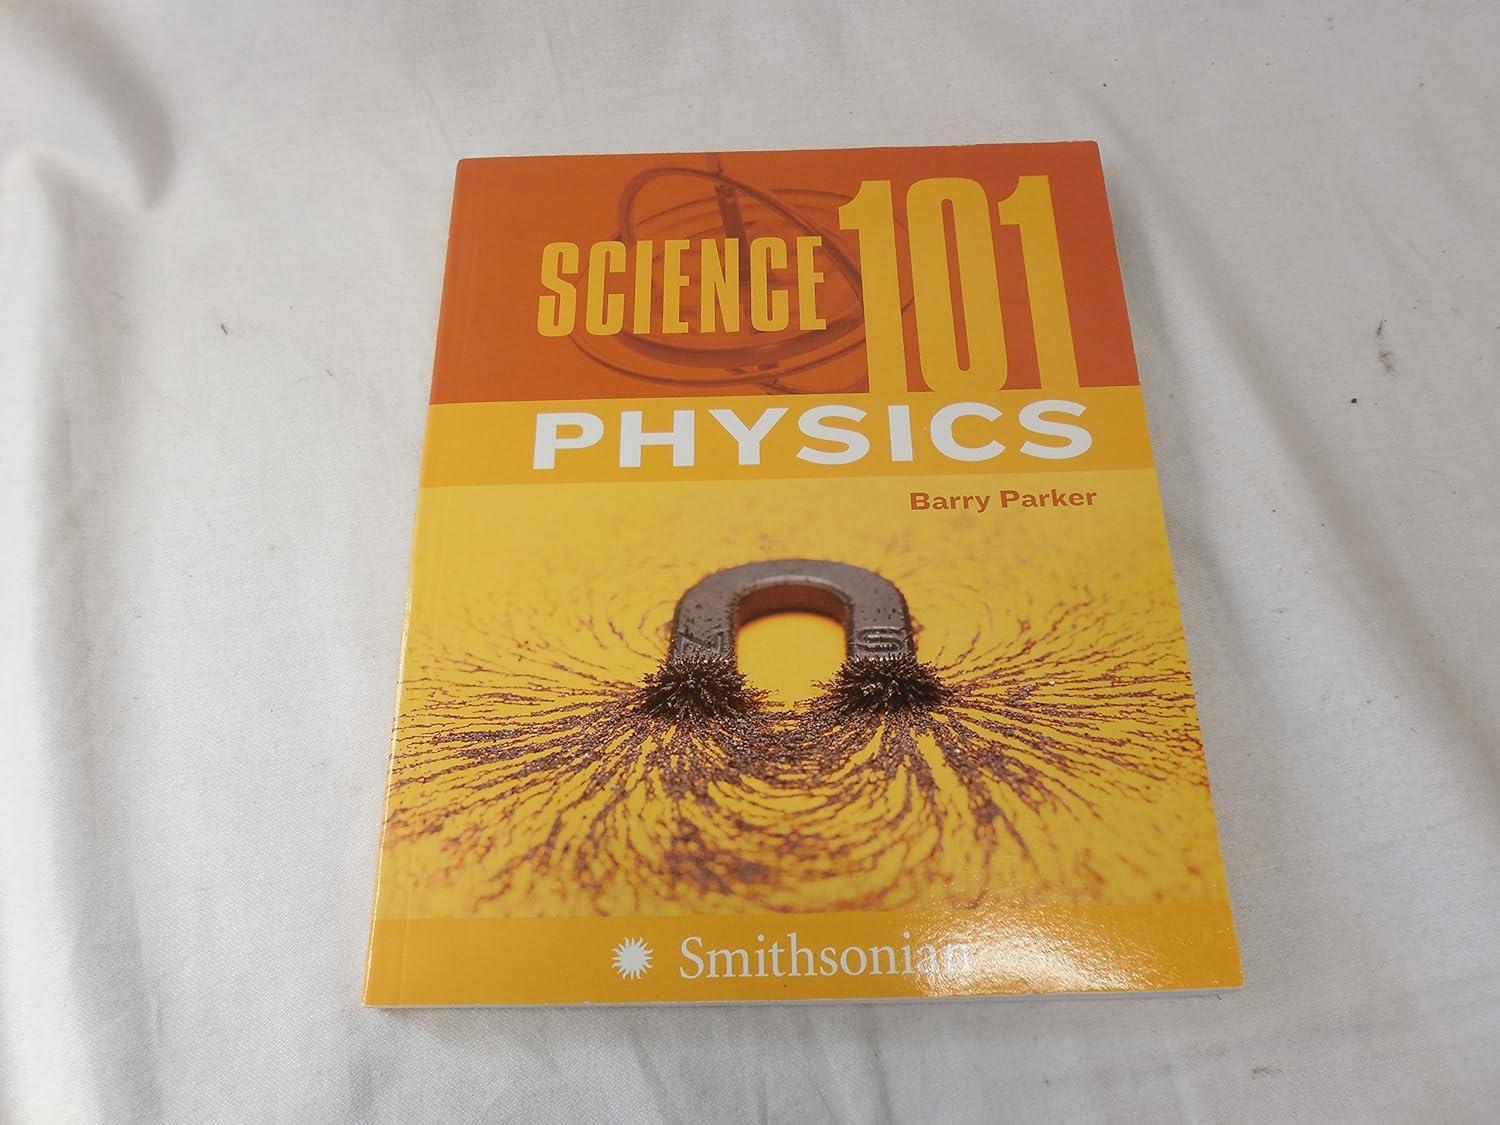 science 101 physics 1st edition barry parker 0060891343, 978-0060891343